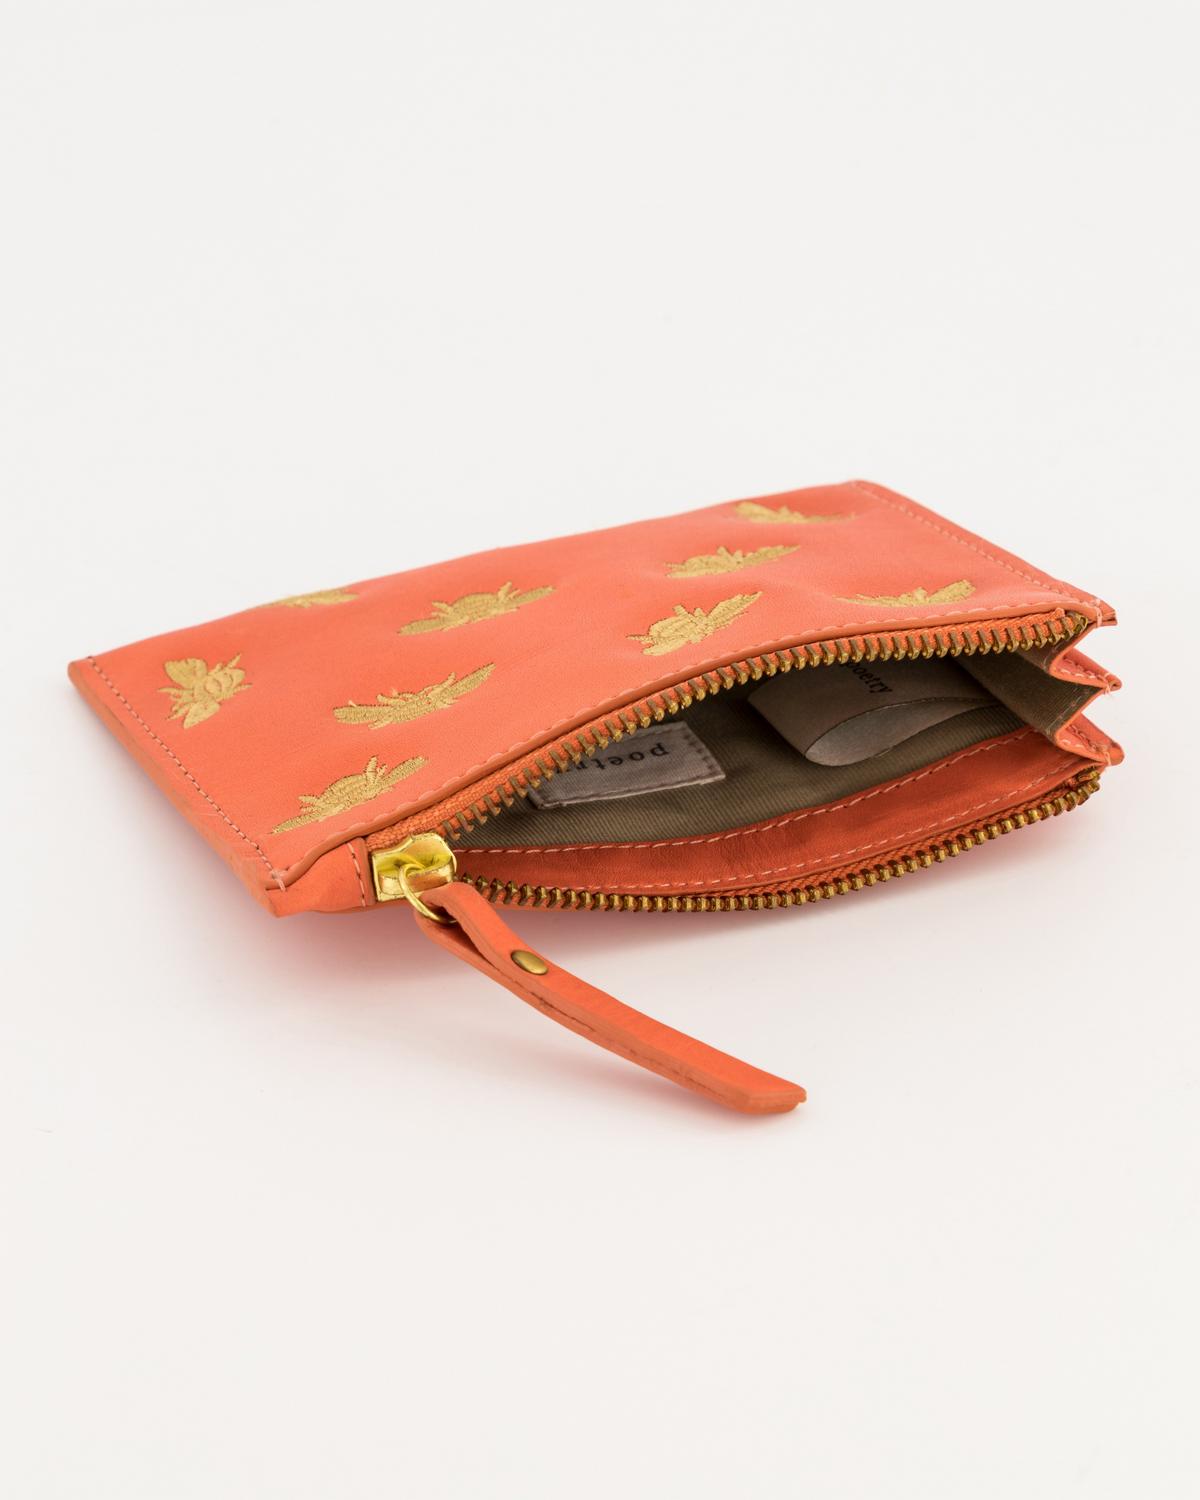 Marrian Embroidered Leather Pouch -  coral